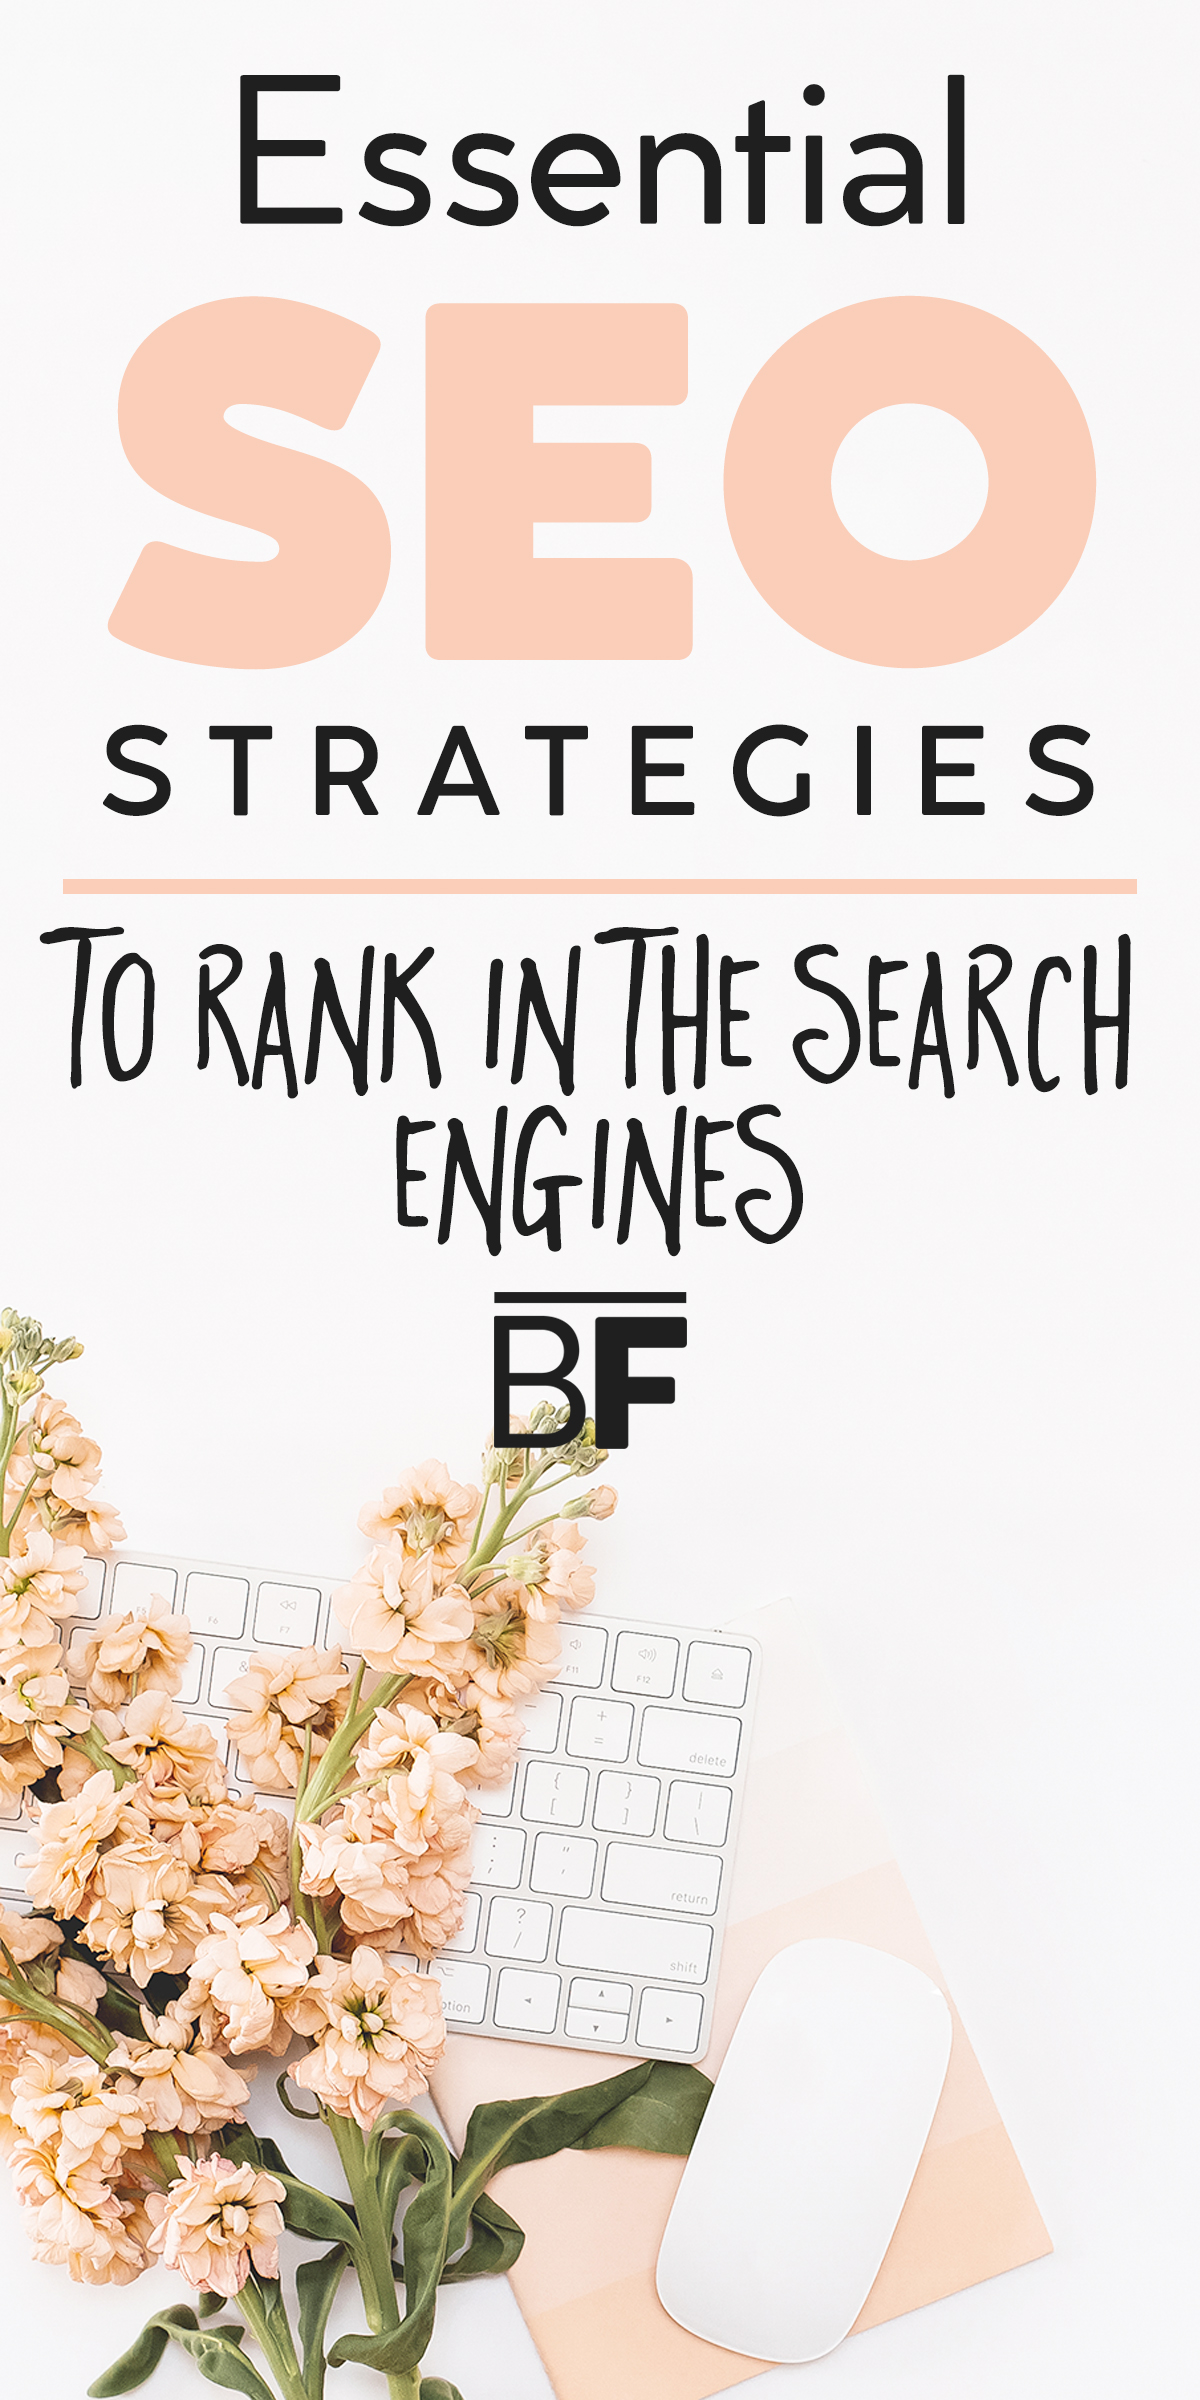 Beginner SEO tips for bloggers. Learn the basics of search engine optimization to drive free organic traffic to your blog for and rank in Google and other search engines! #bloggingtips #seo #searchengineoptimization #seotips #beginnerseotips